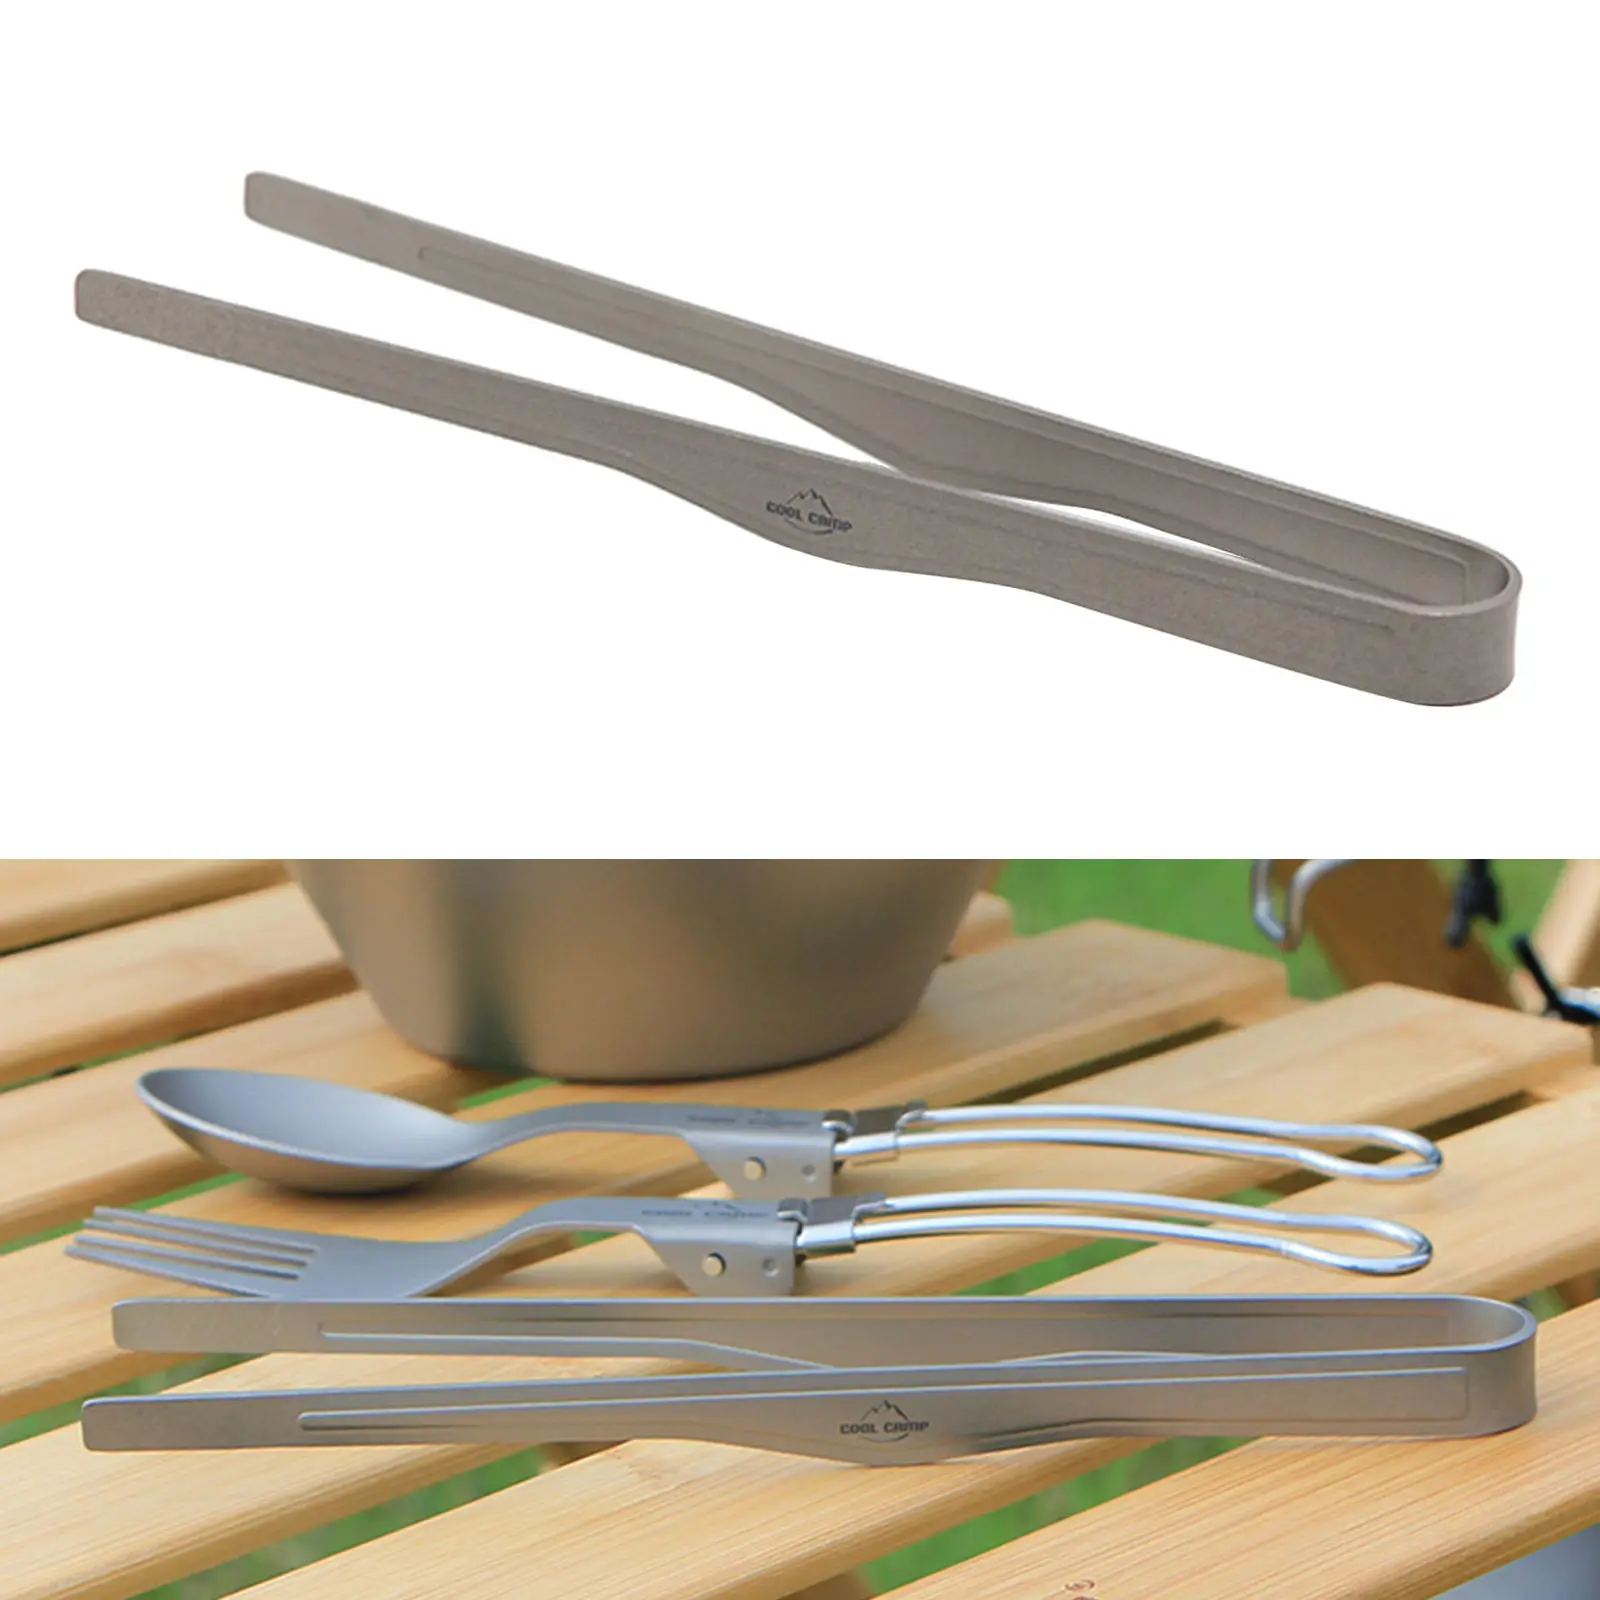 Grill Tongs Barbecue Lightweight Tool Reusable Handy Non-Slip Portable Multi-Purpose Tweezer Clip for Ice Tea Cup Toast Salad